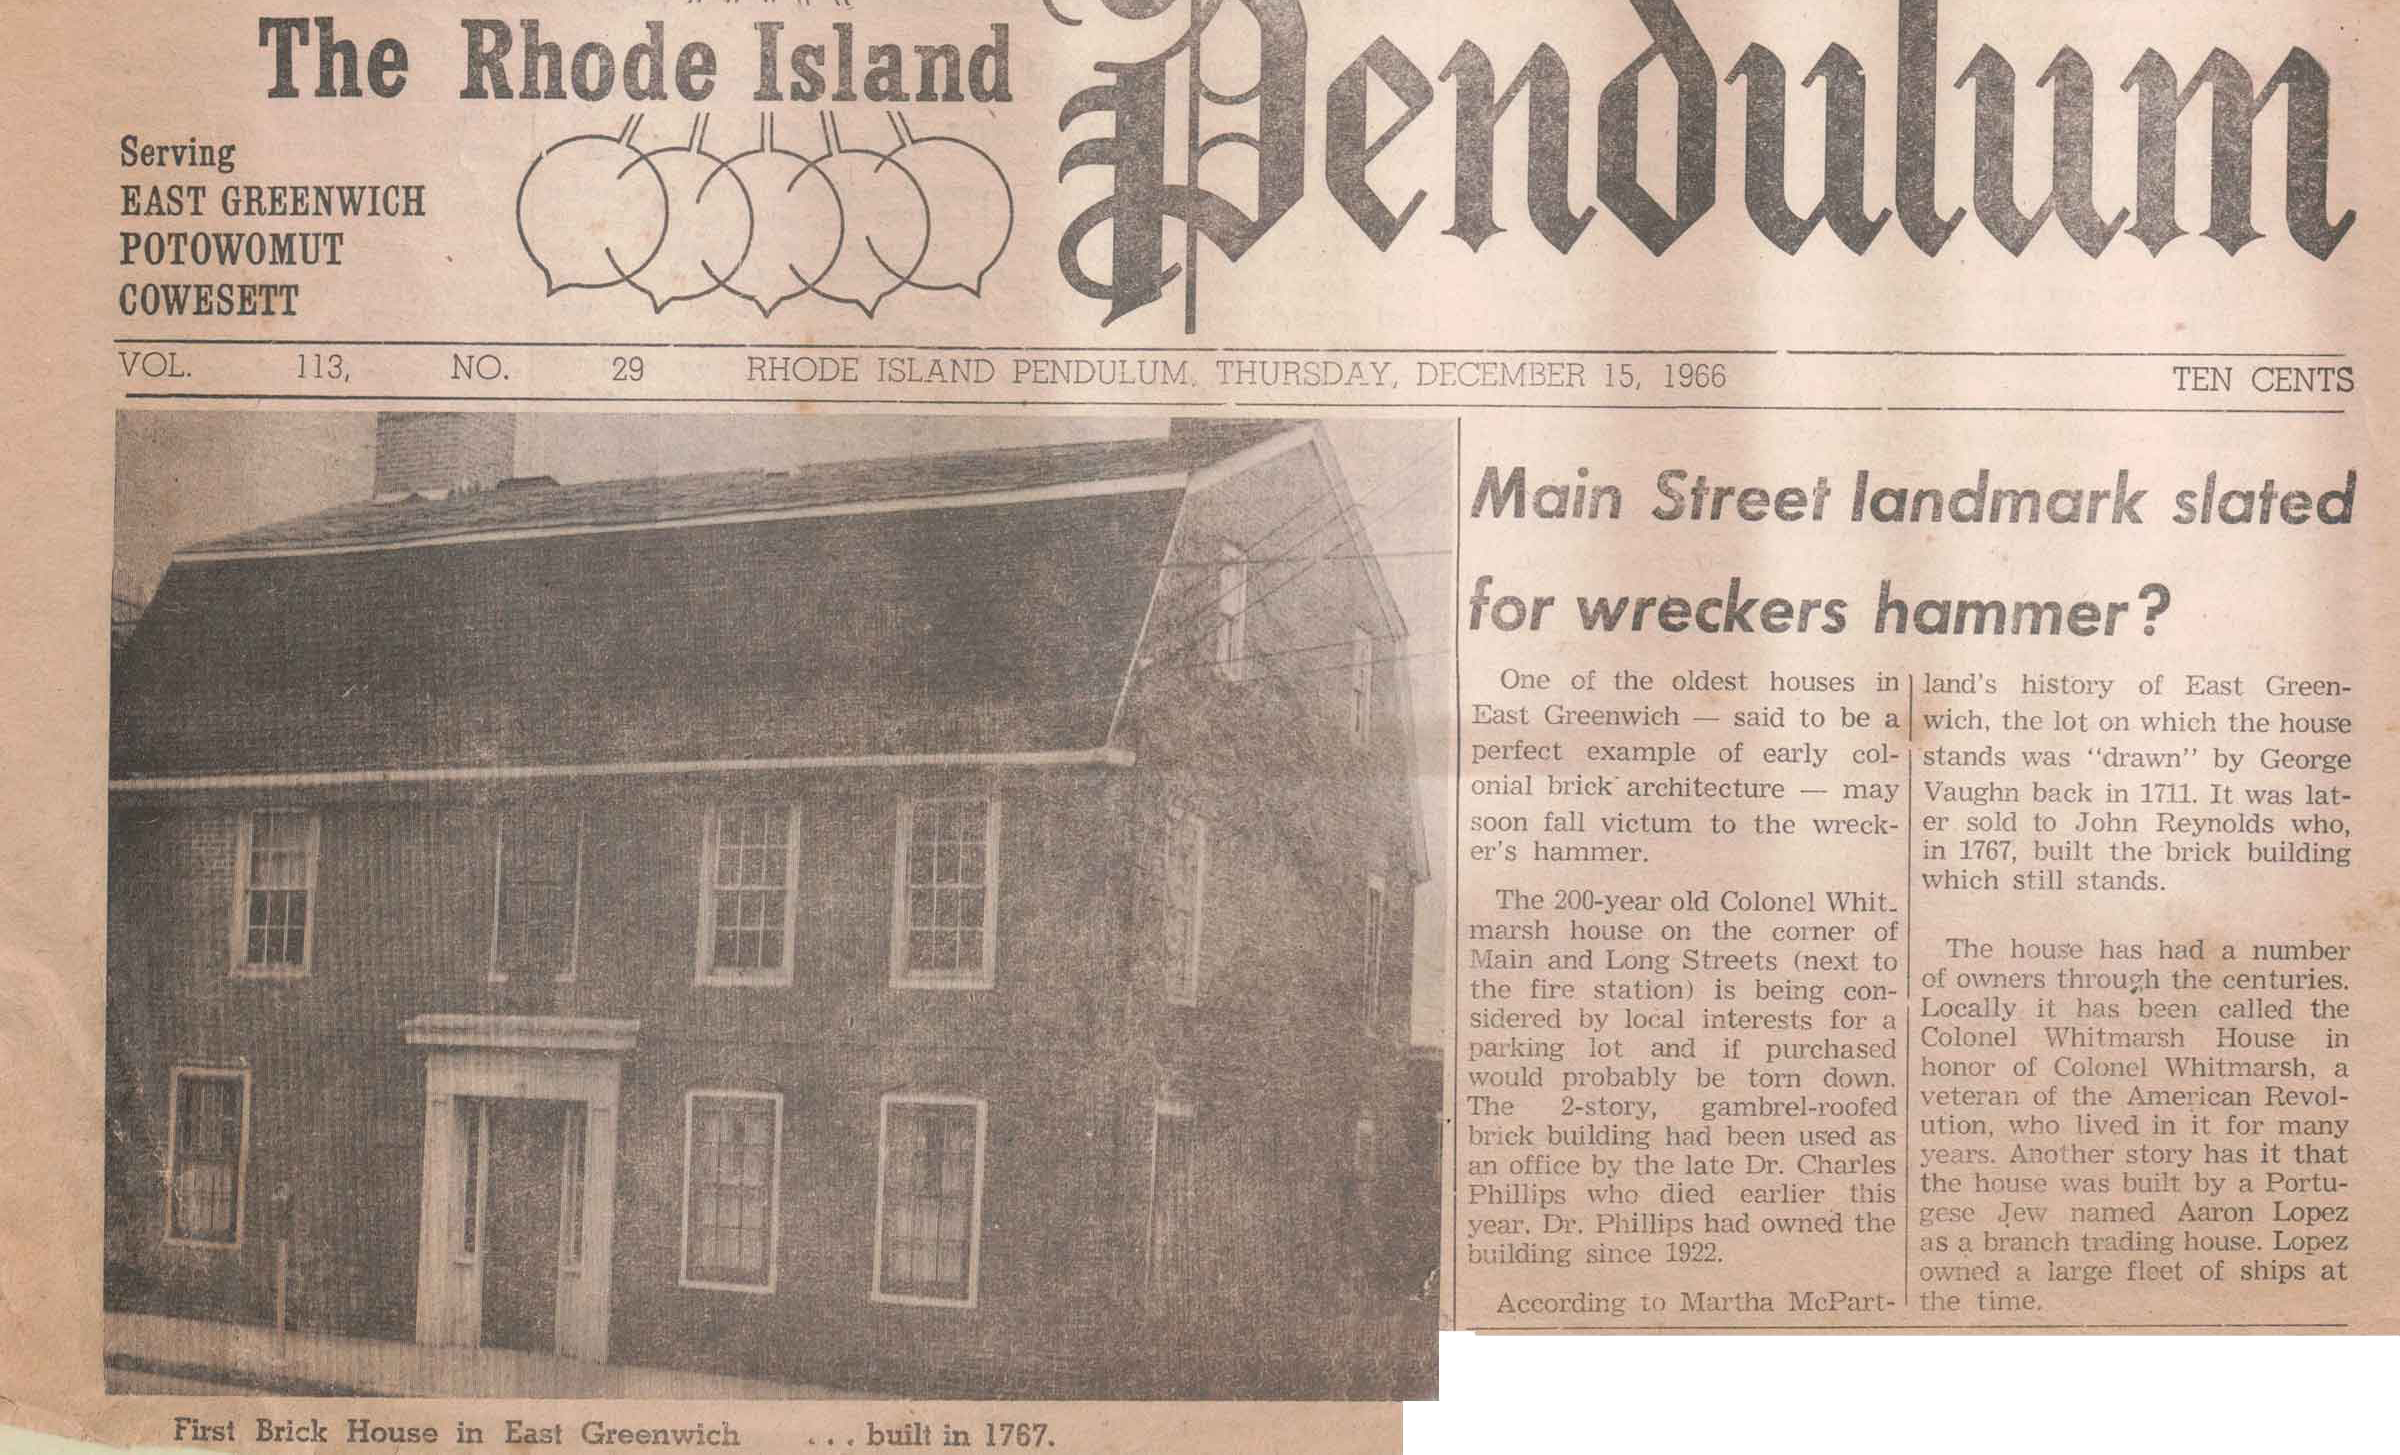 The Rhode Island Pendulum from December 15, 1966 with an article about the Brick House.